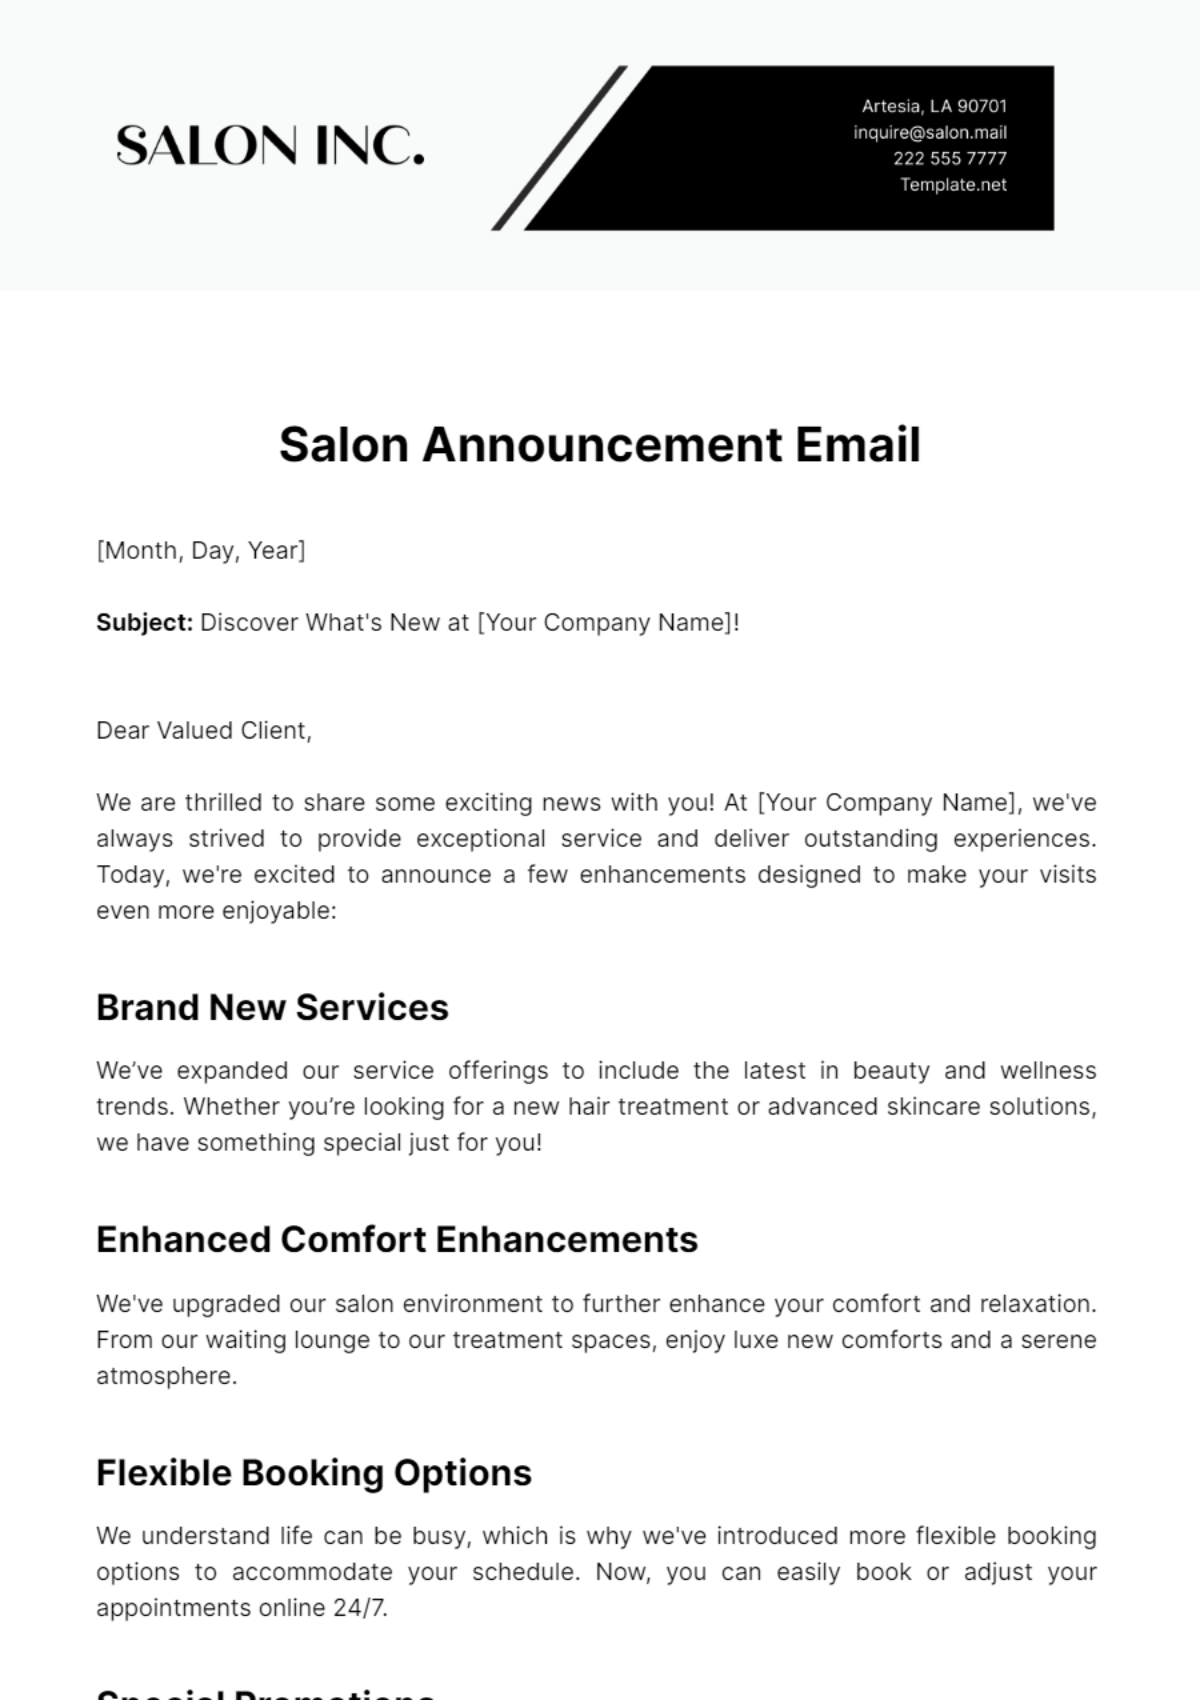 Free Salon Announcement Email Template